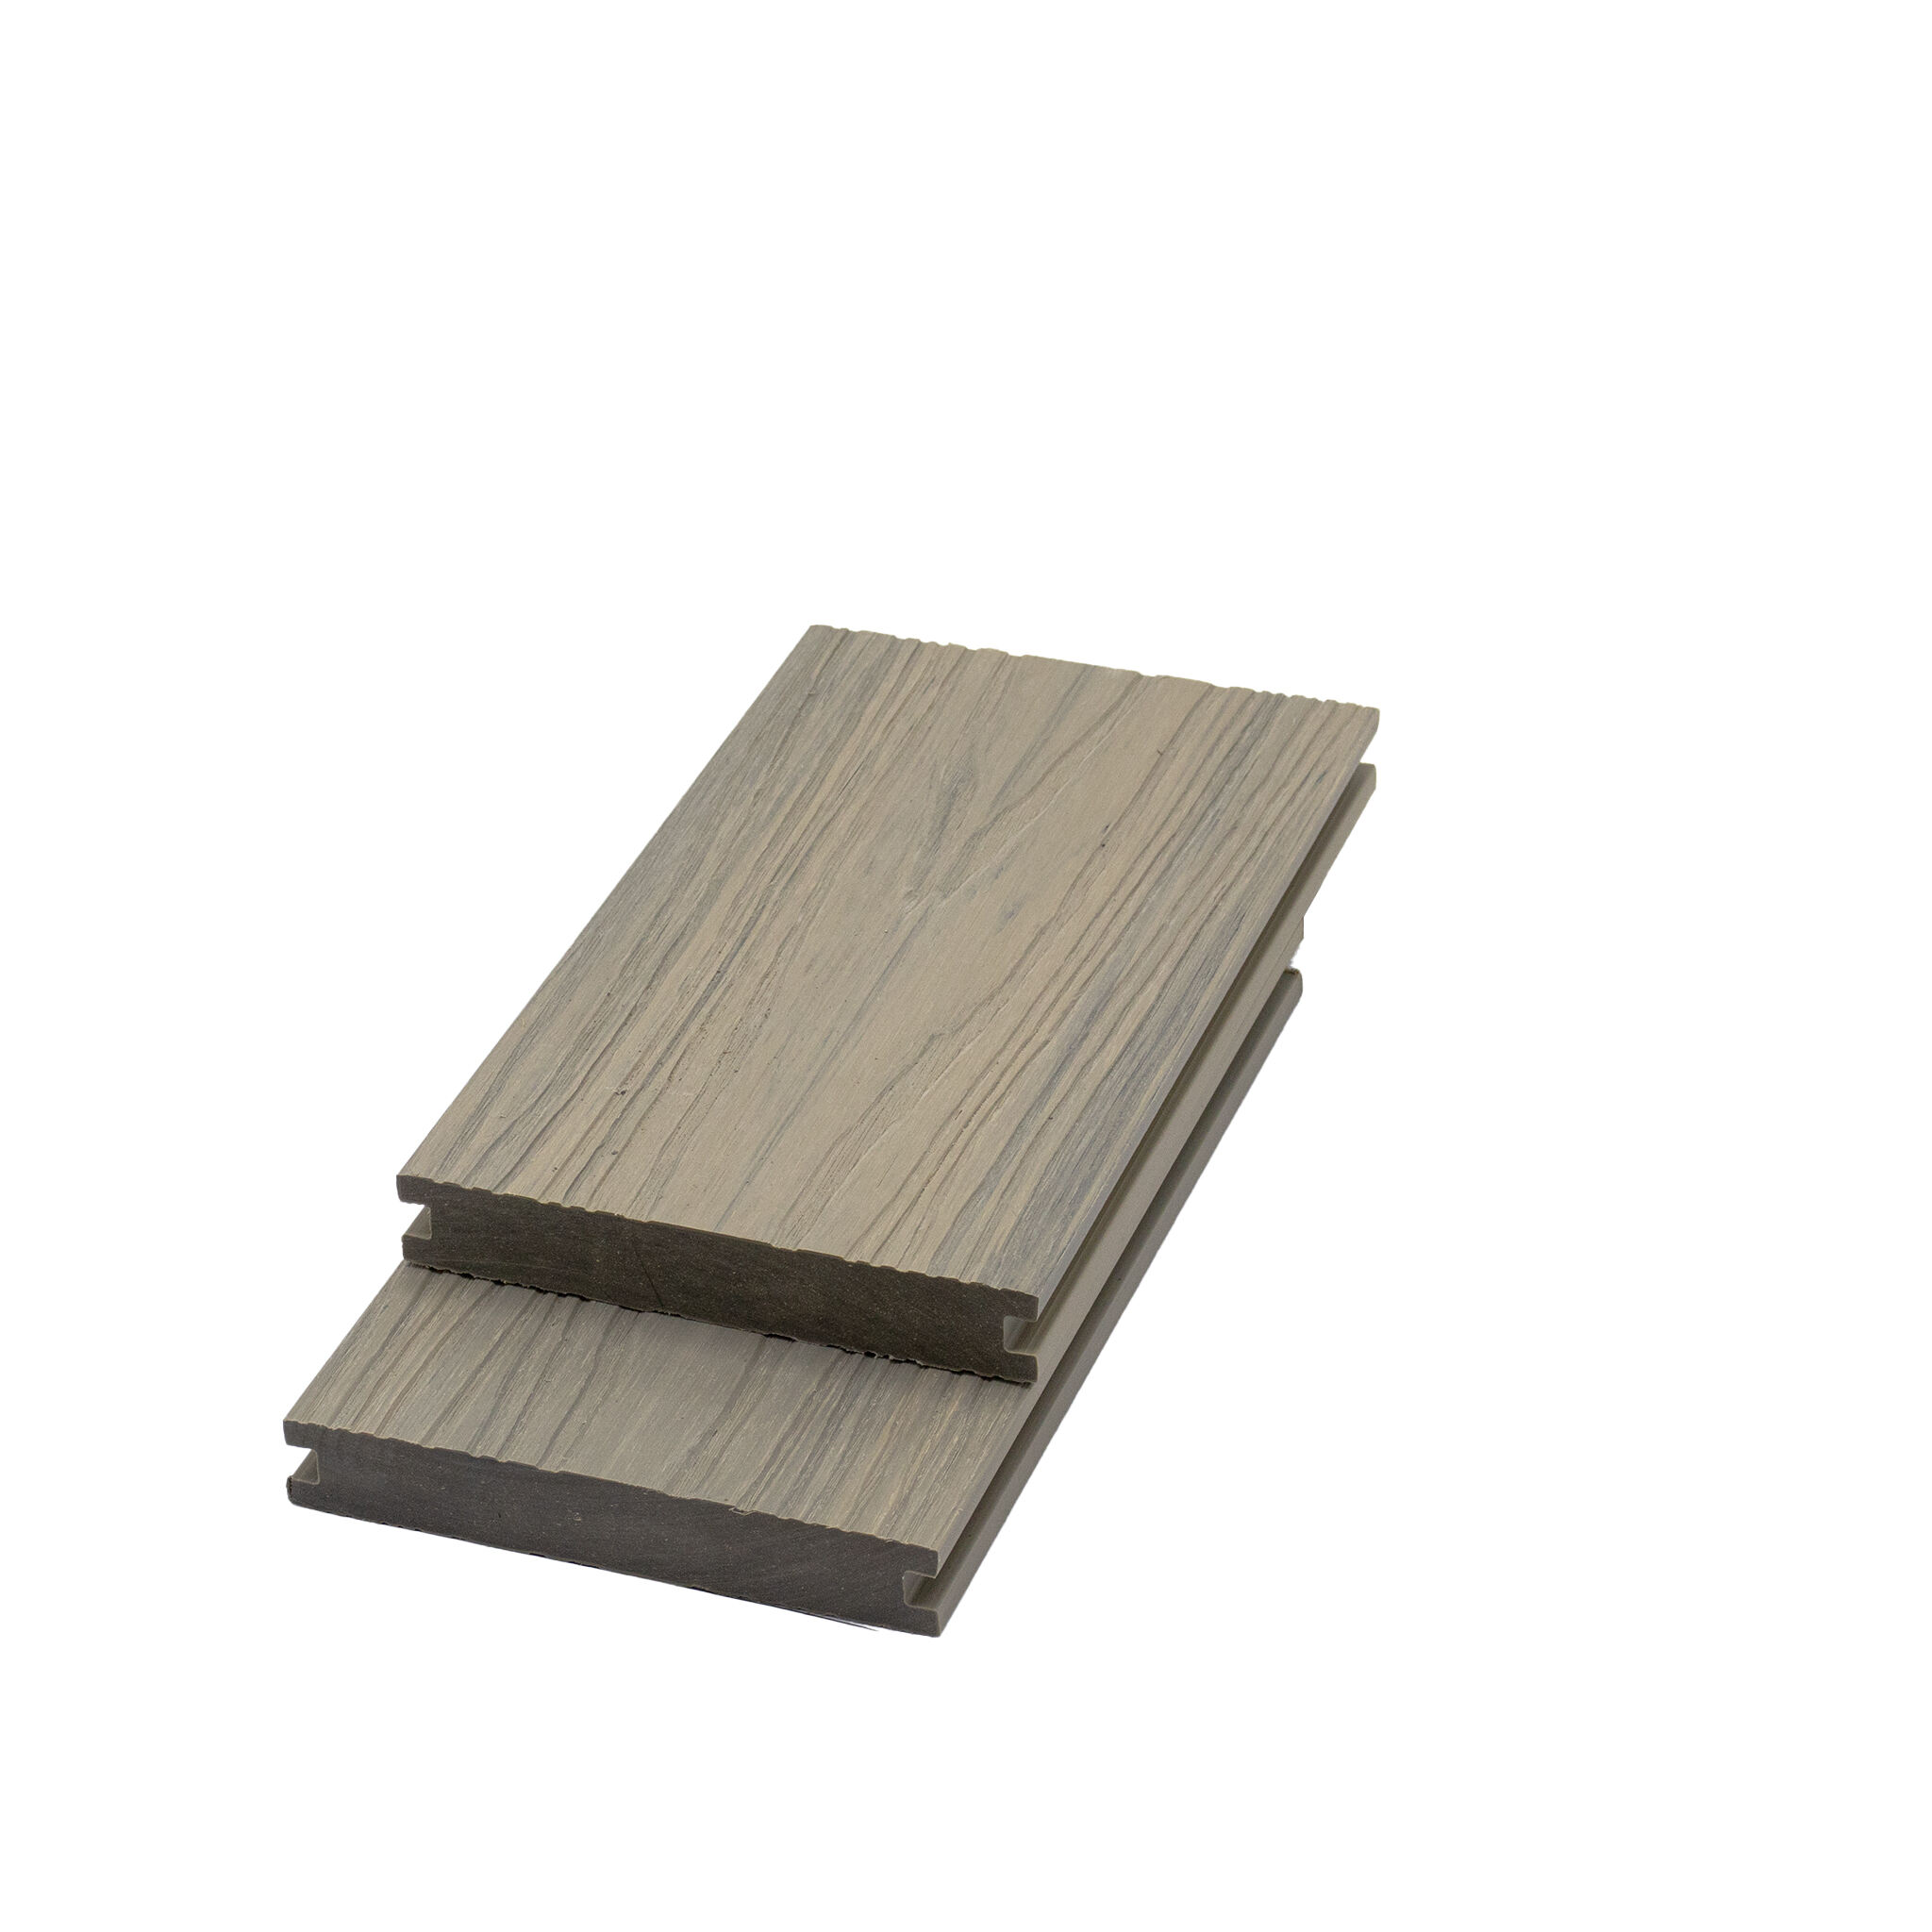 Co-Extrusion Solid Composite Decking  138S23- Advanced Technology -Outdoor WPC Capped Decking